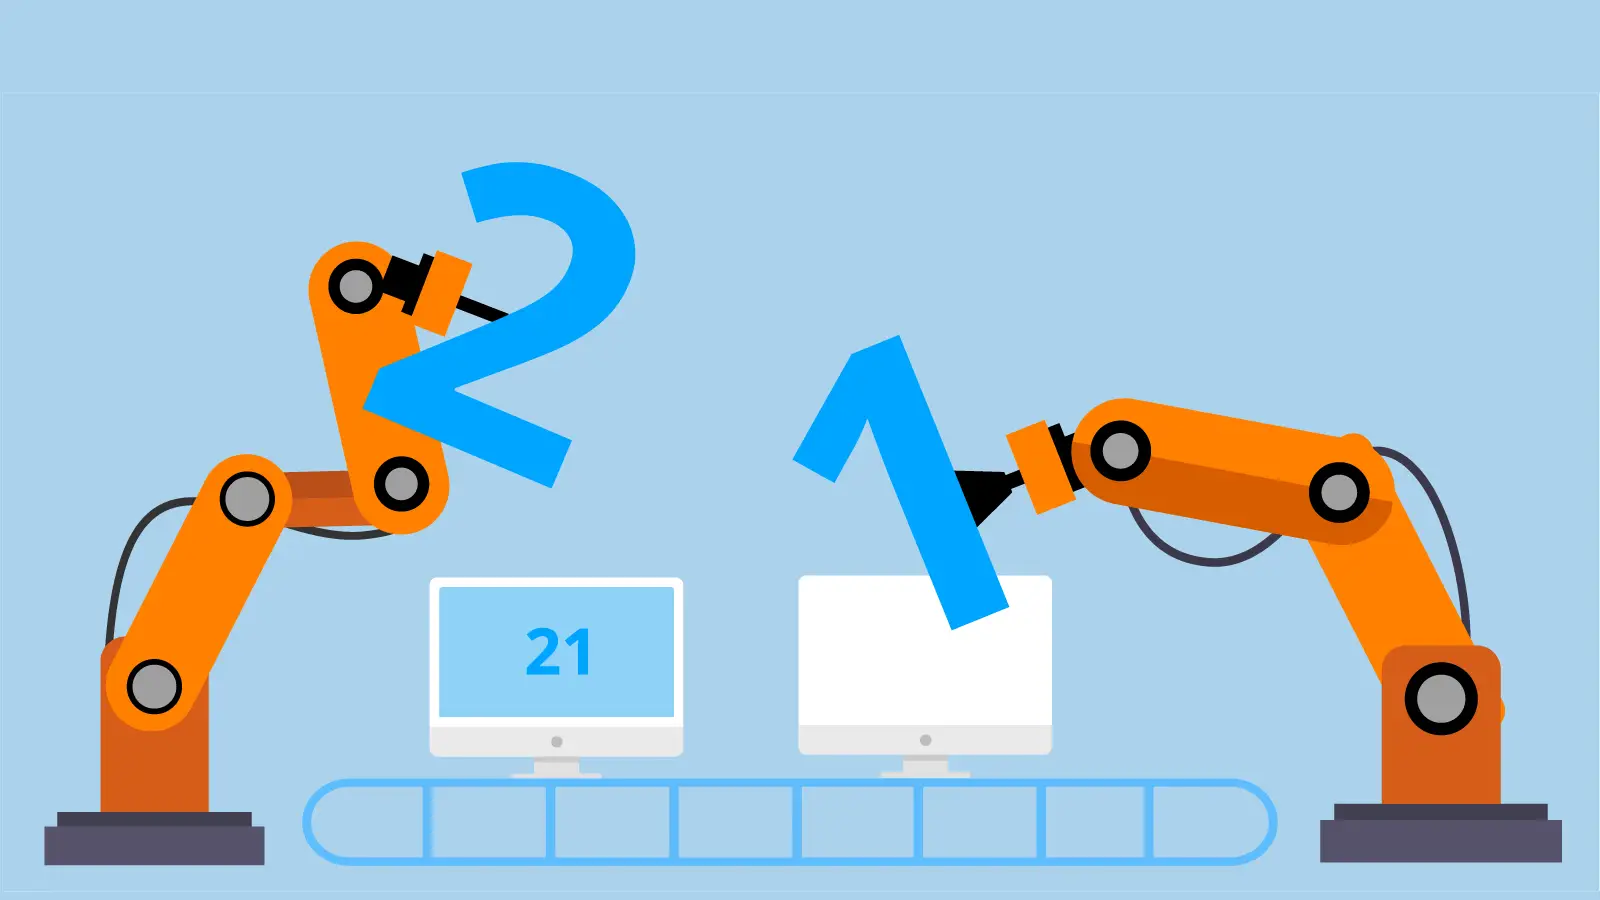 An illustration depicting the numbers 21 in Production.